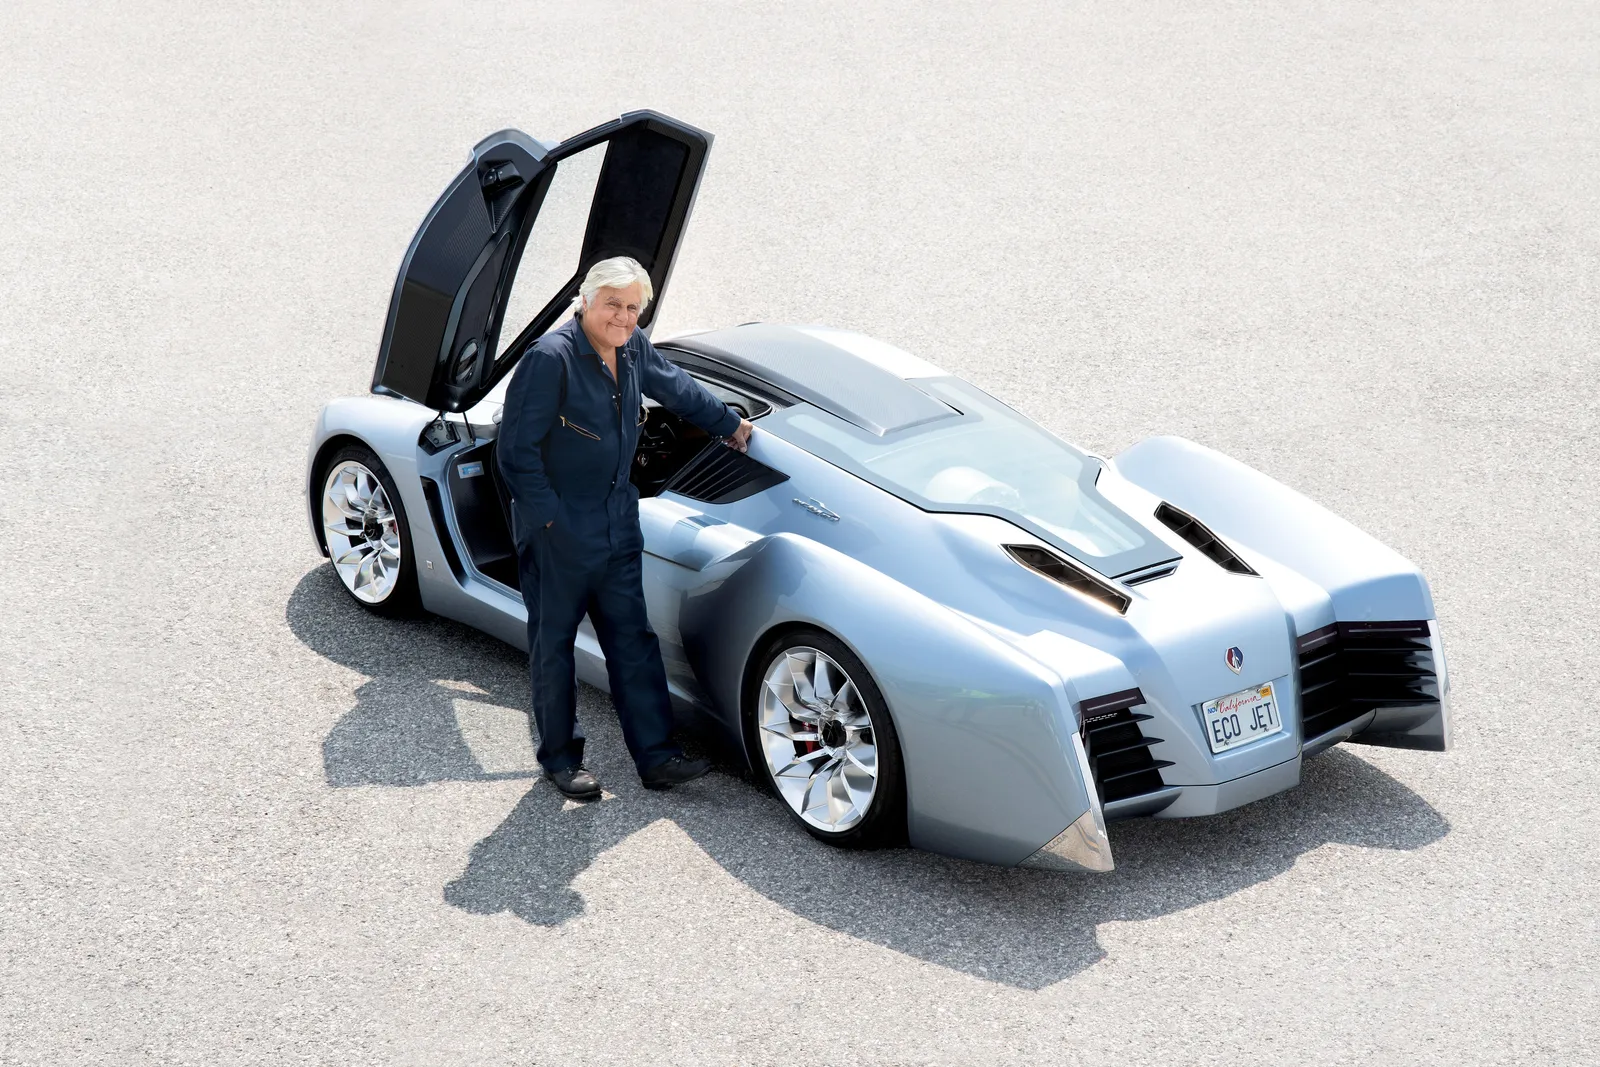 Jay Leno Unveils Three New Spectacular Car Care Products at